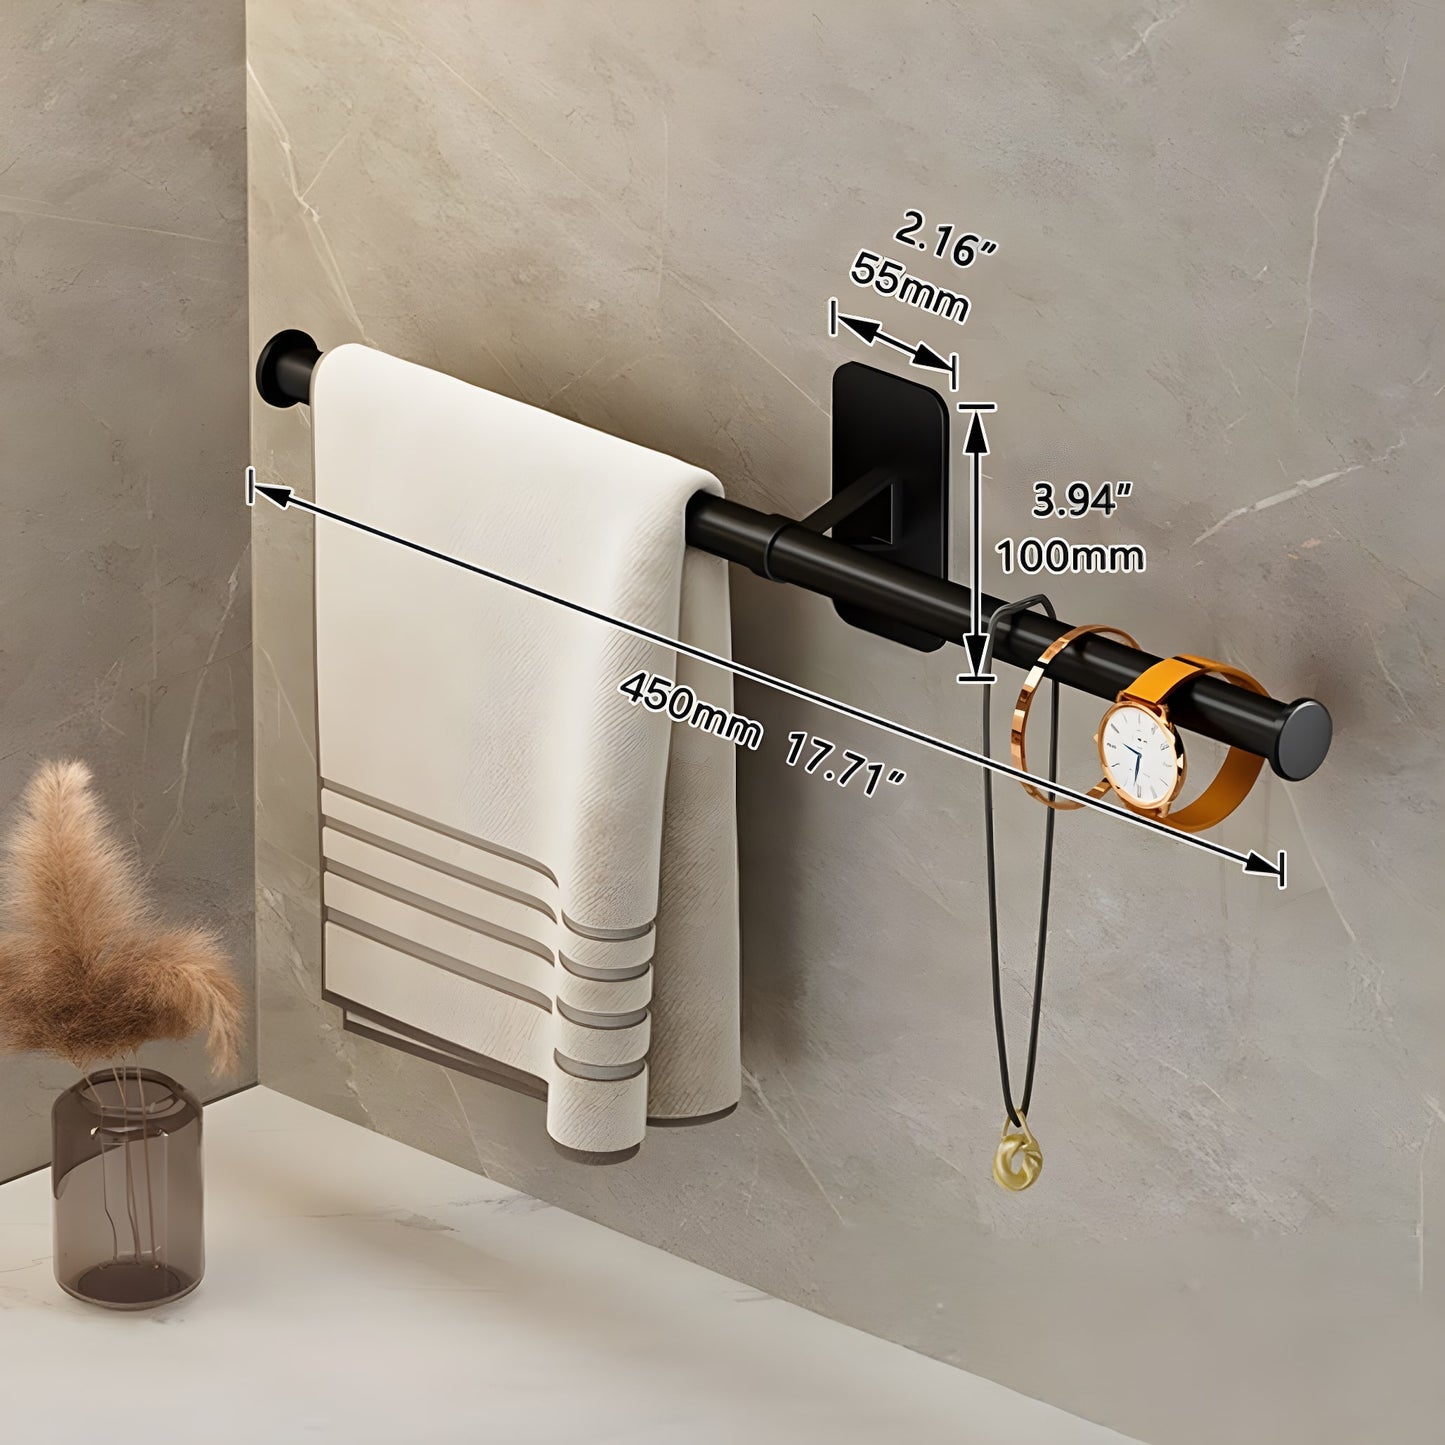 Bath towel holders for wall mounting